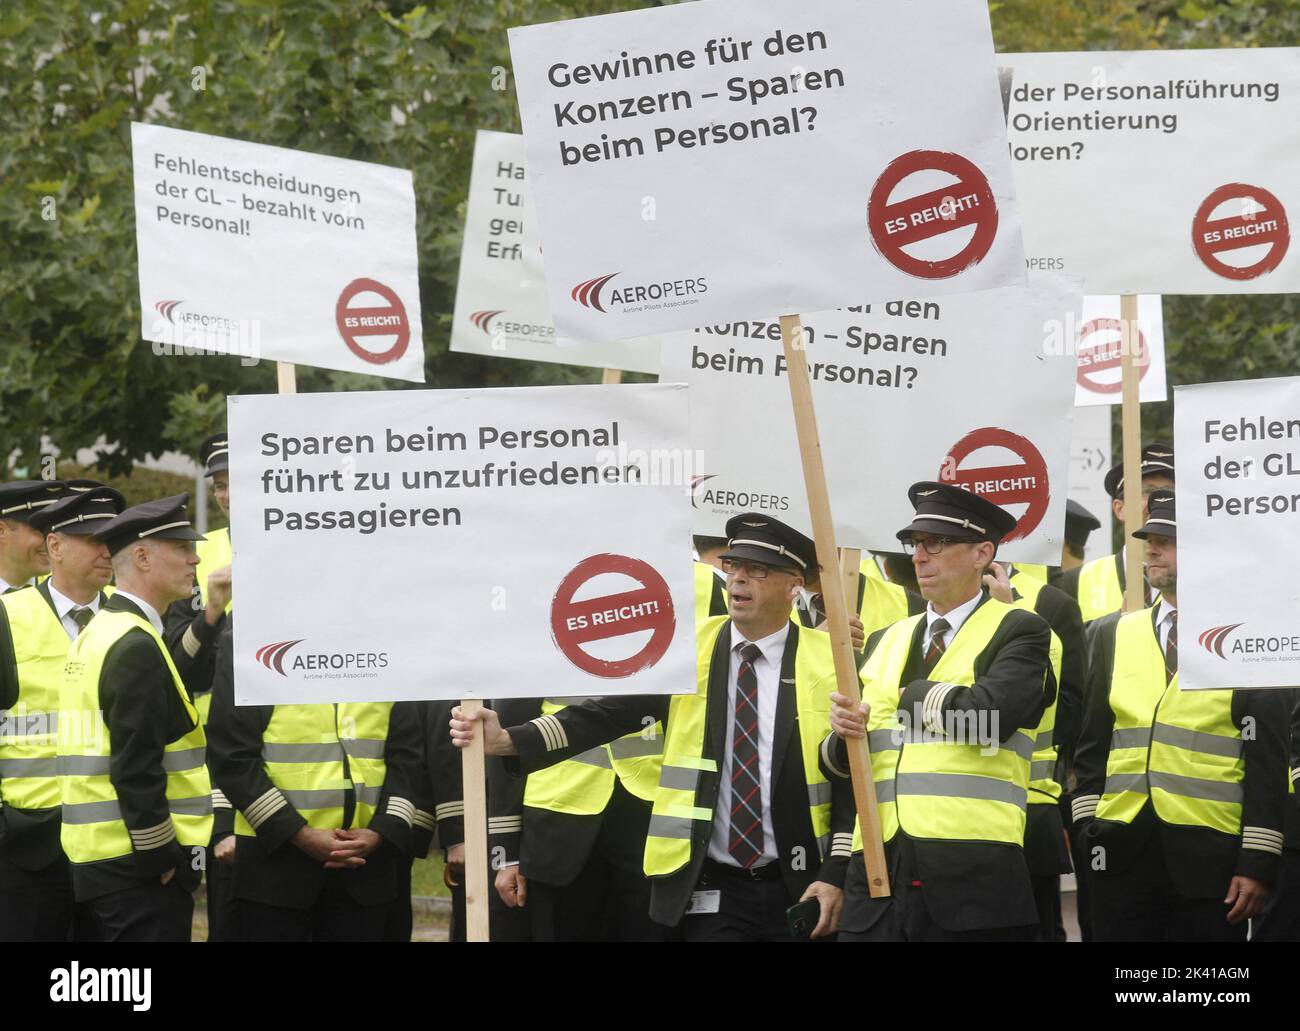 Members of AEROPERS - Airline Pilots Association display posters during a protest in front of the headquarters of Swiss International Air Lines in Kloten, Switzerland September 29,  2022.  REUTERS/Arnd Wiegmann Stock Photo